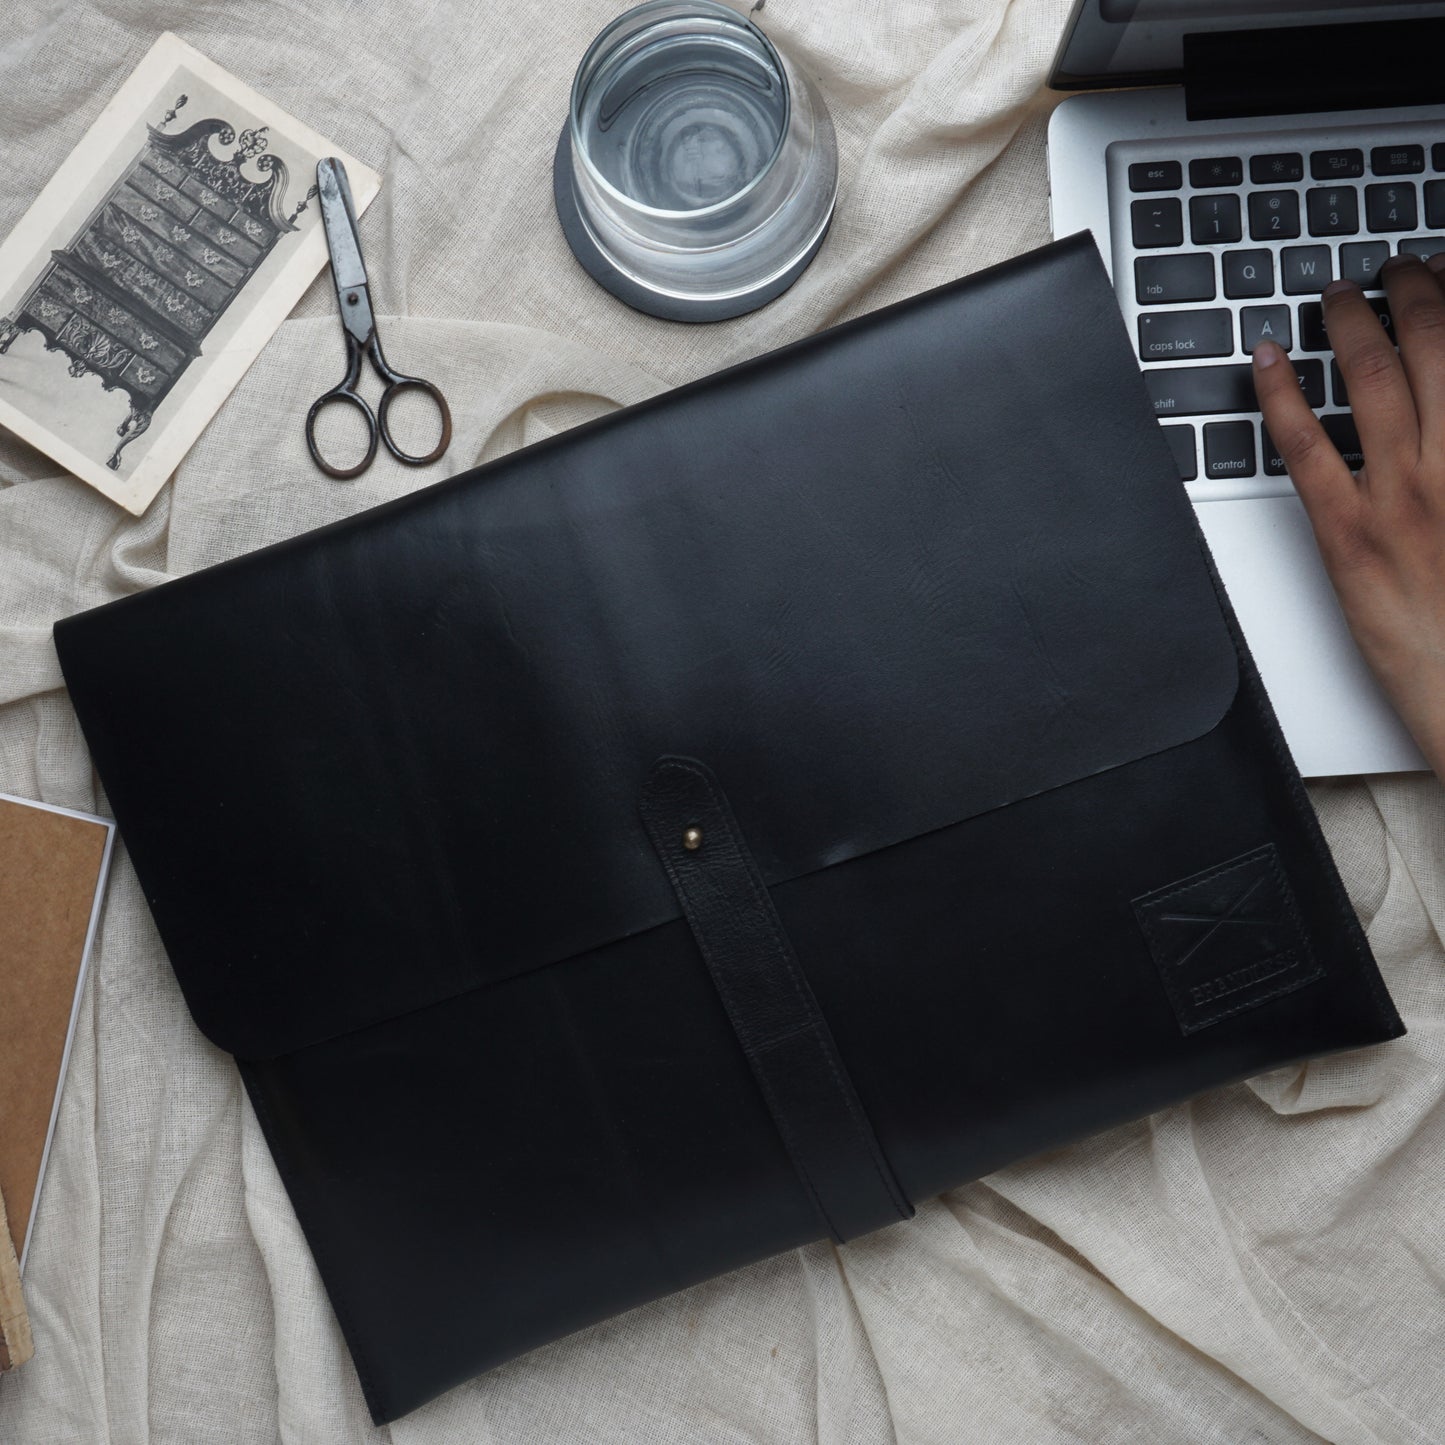 HANDCRAFTED LEATHER LAPTOP SLEEVE COVER 